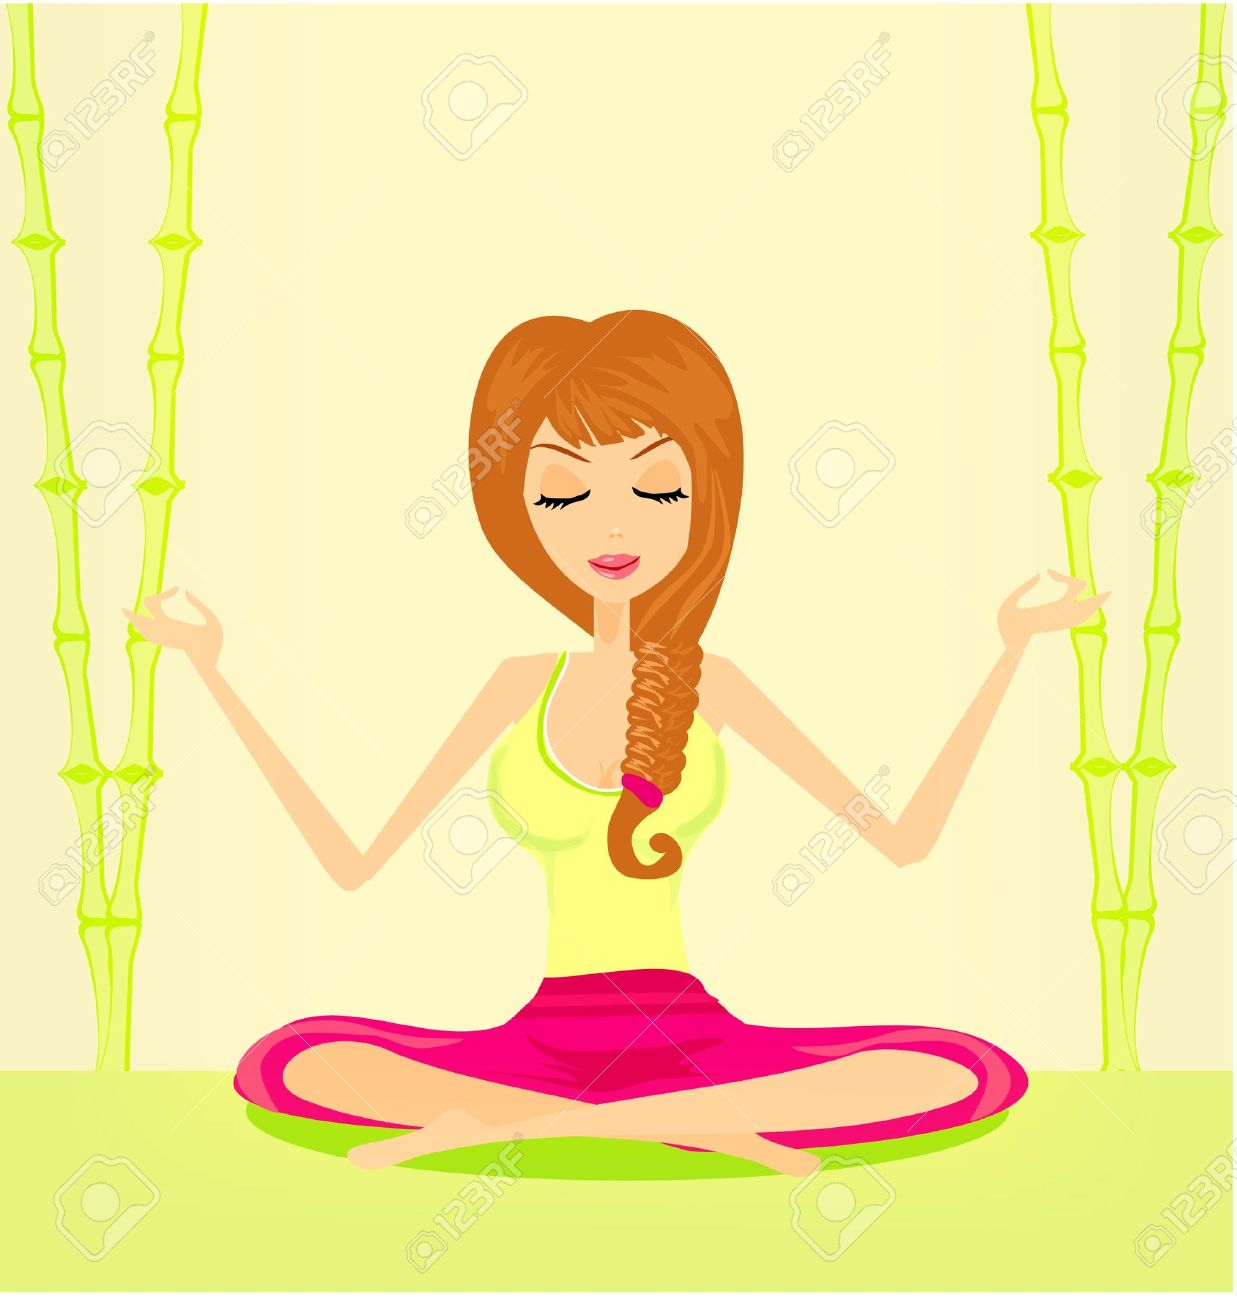 girl relaxing clipart - photo #12